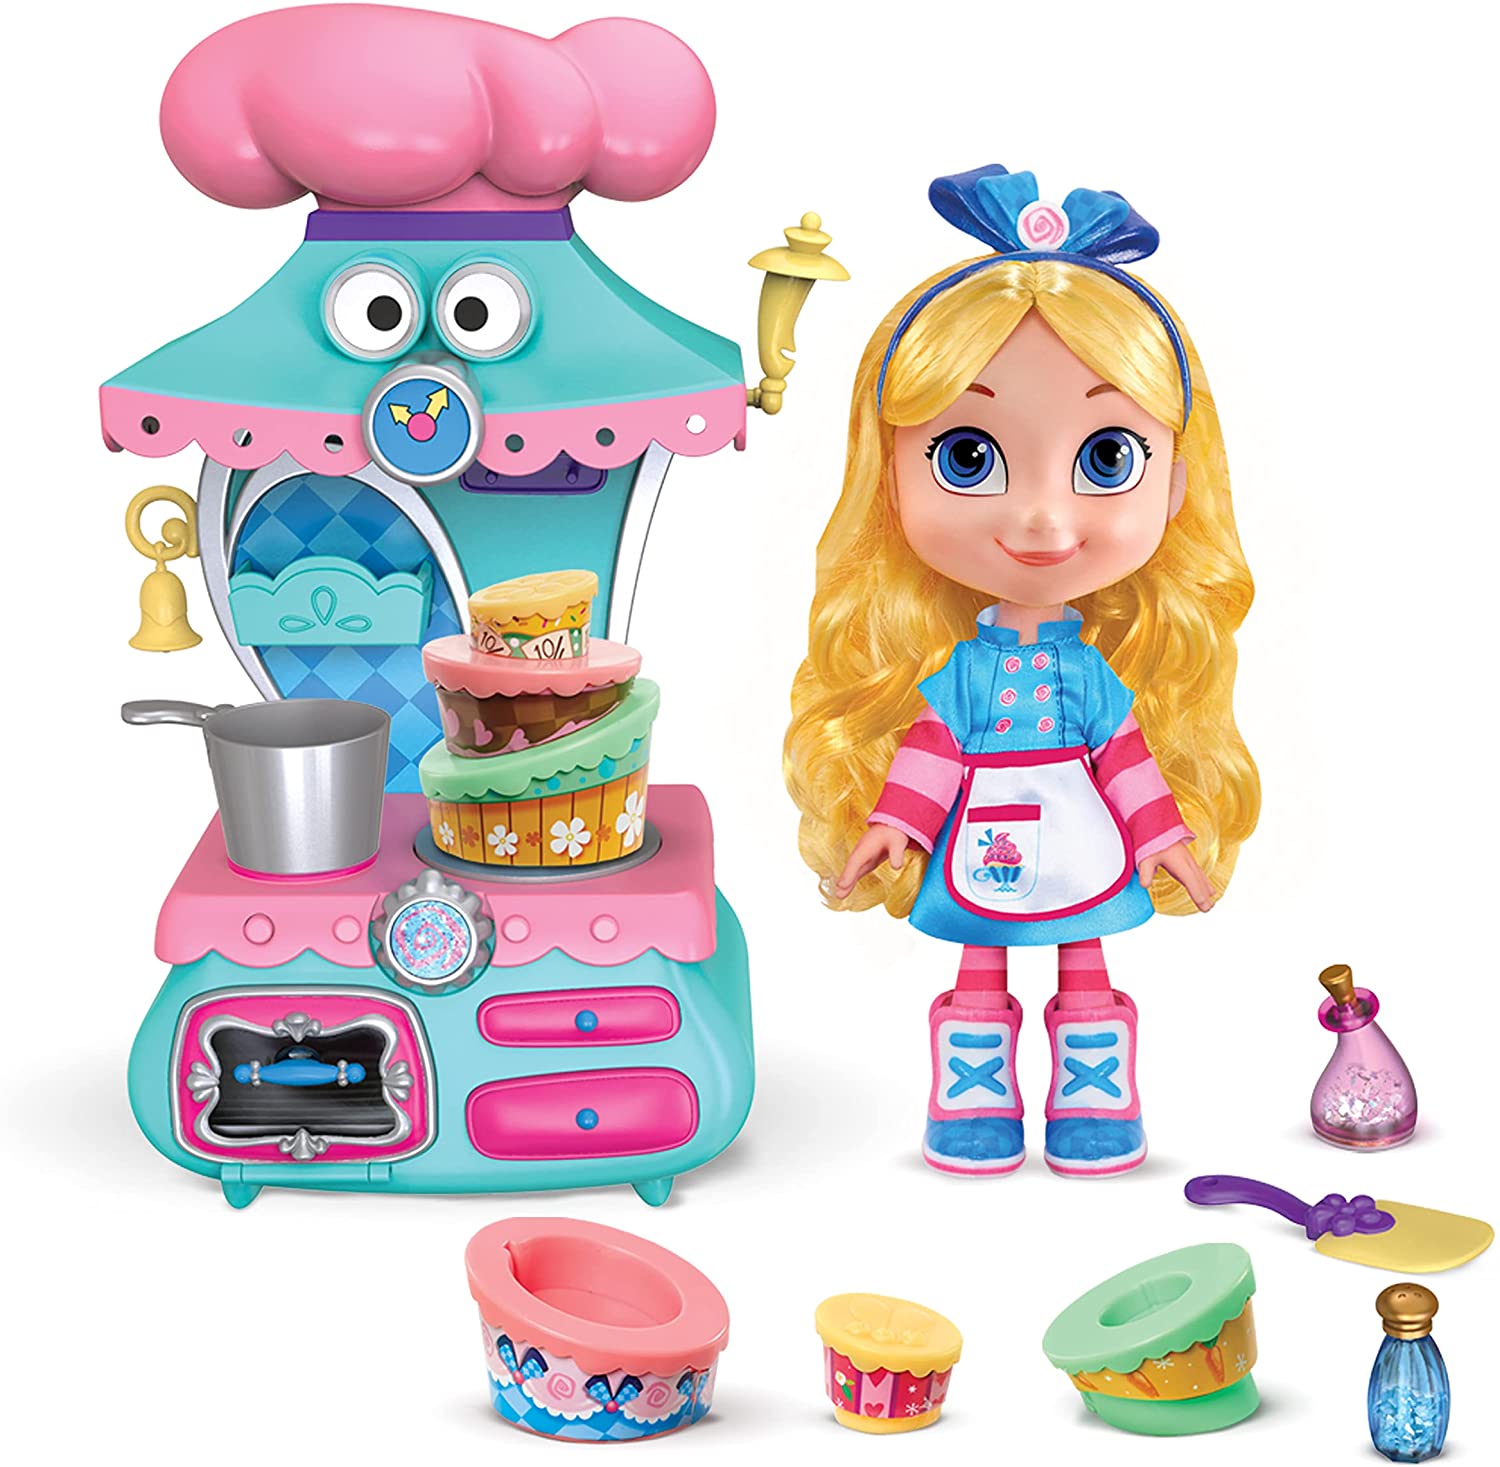 Alice Wonderland Bakery Disney Junior Alices Wonderland Bakery Playset and Toy Figures 15 Pieces Officially Licensed Kids Toys for Ages 3 Up Exclusiv